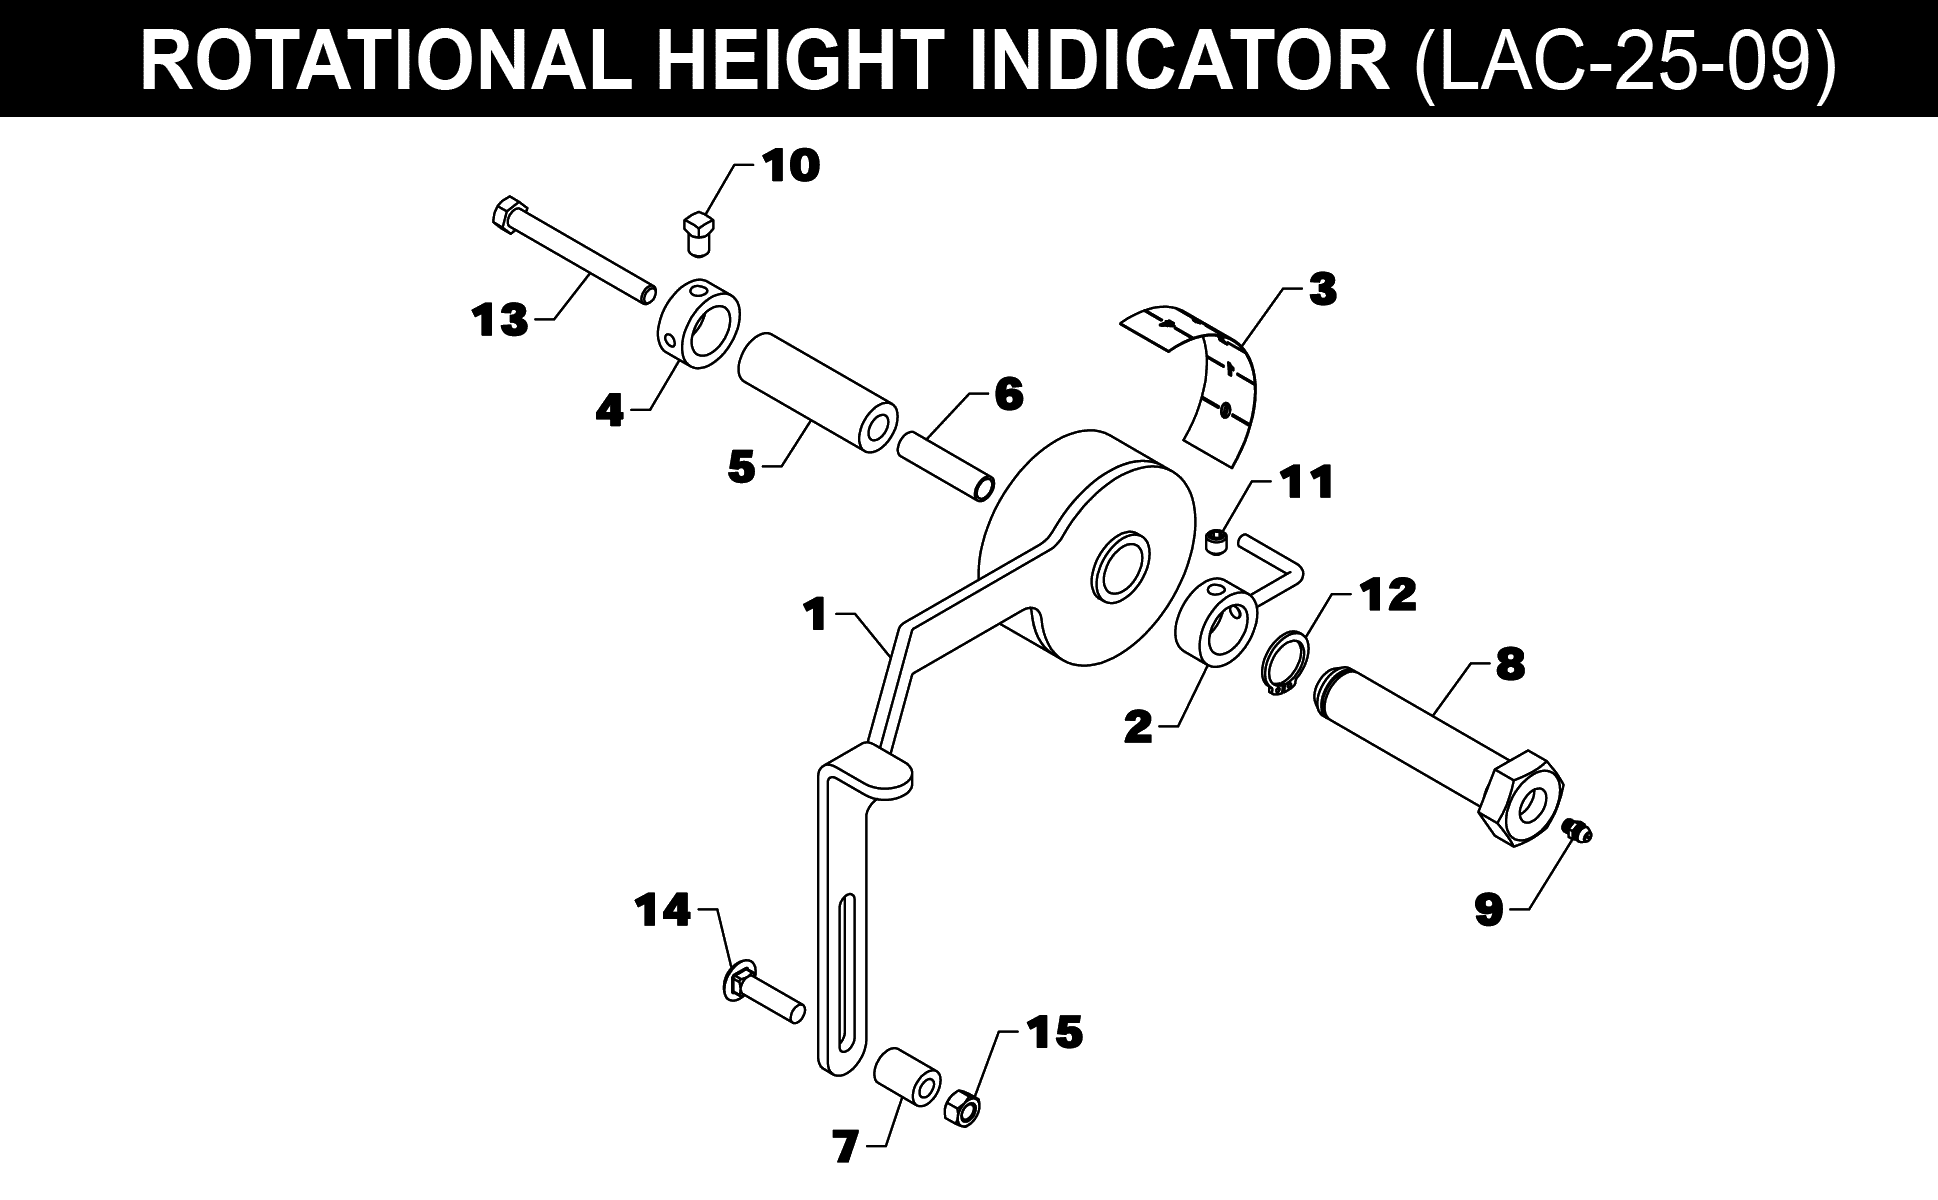 Height Indicator - LAC-25-09